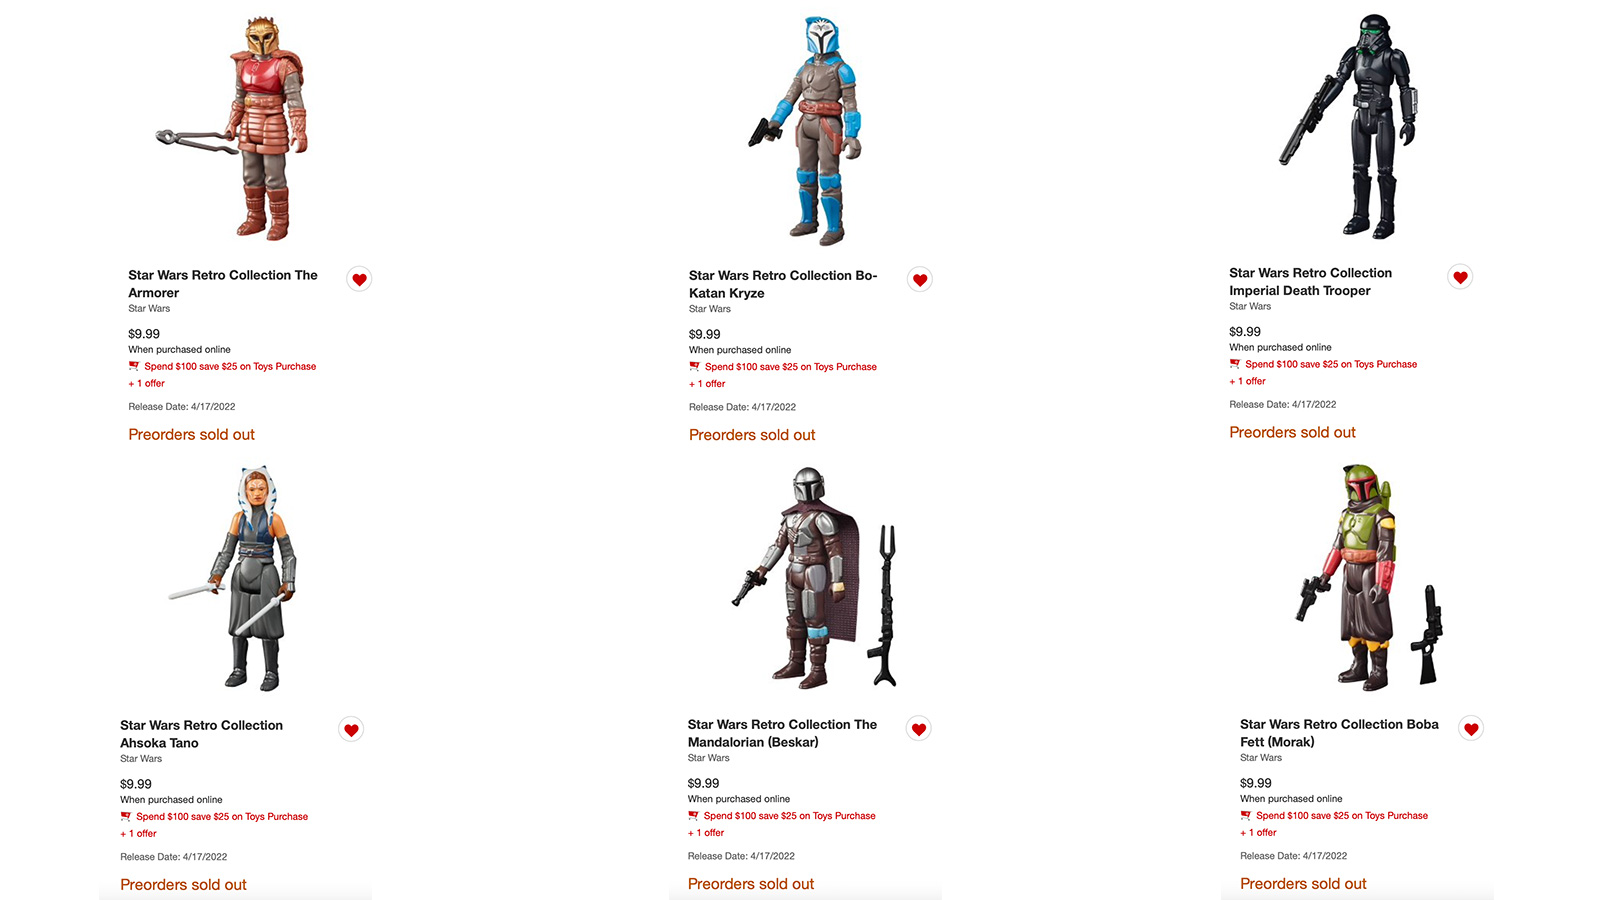 Shipping Soon From Target.com - Retro Collection 3.75-Inch The Mandalorian Wave 2 Figures